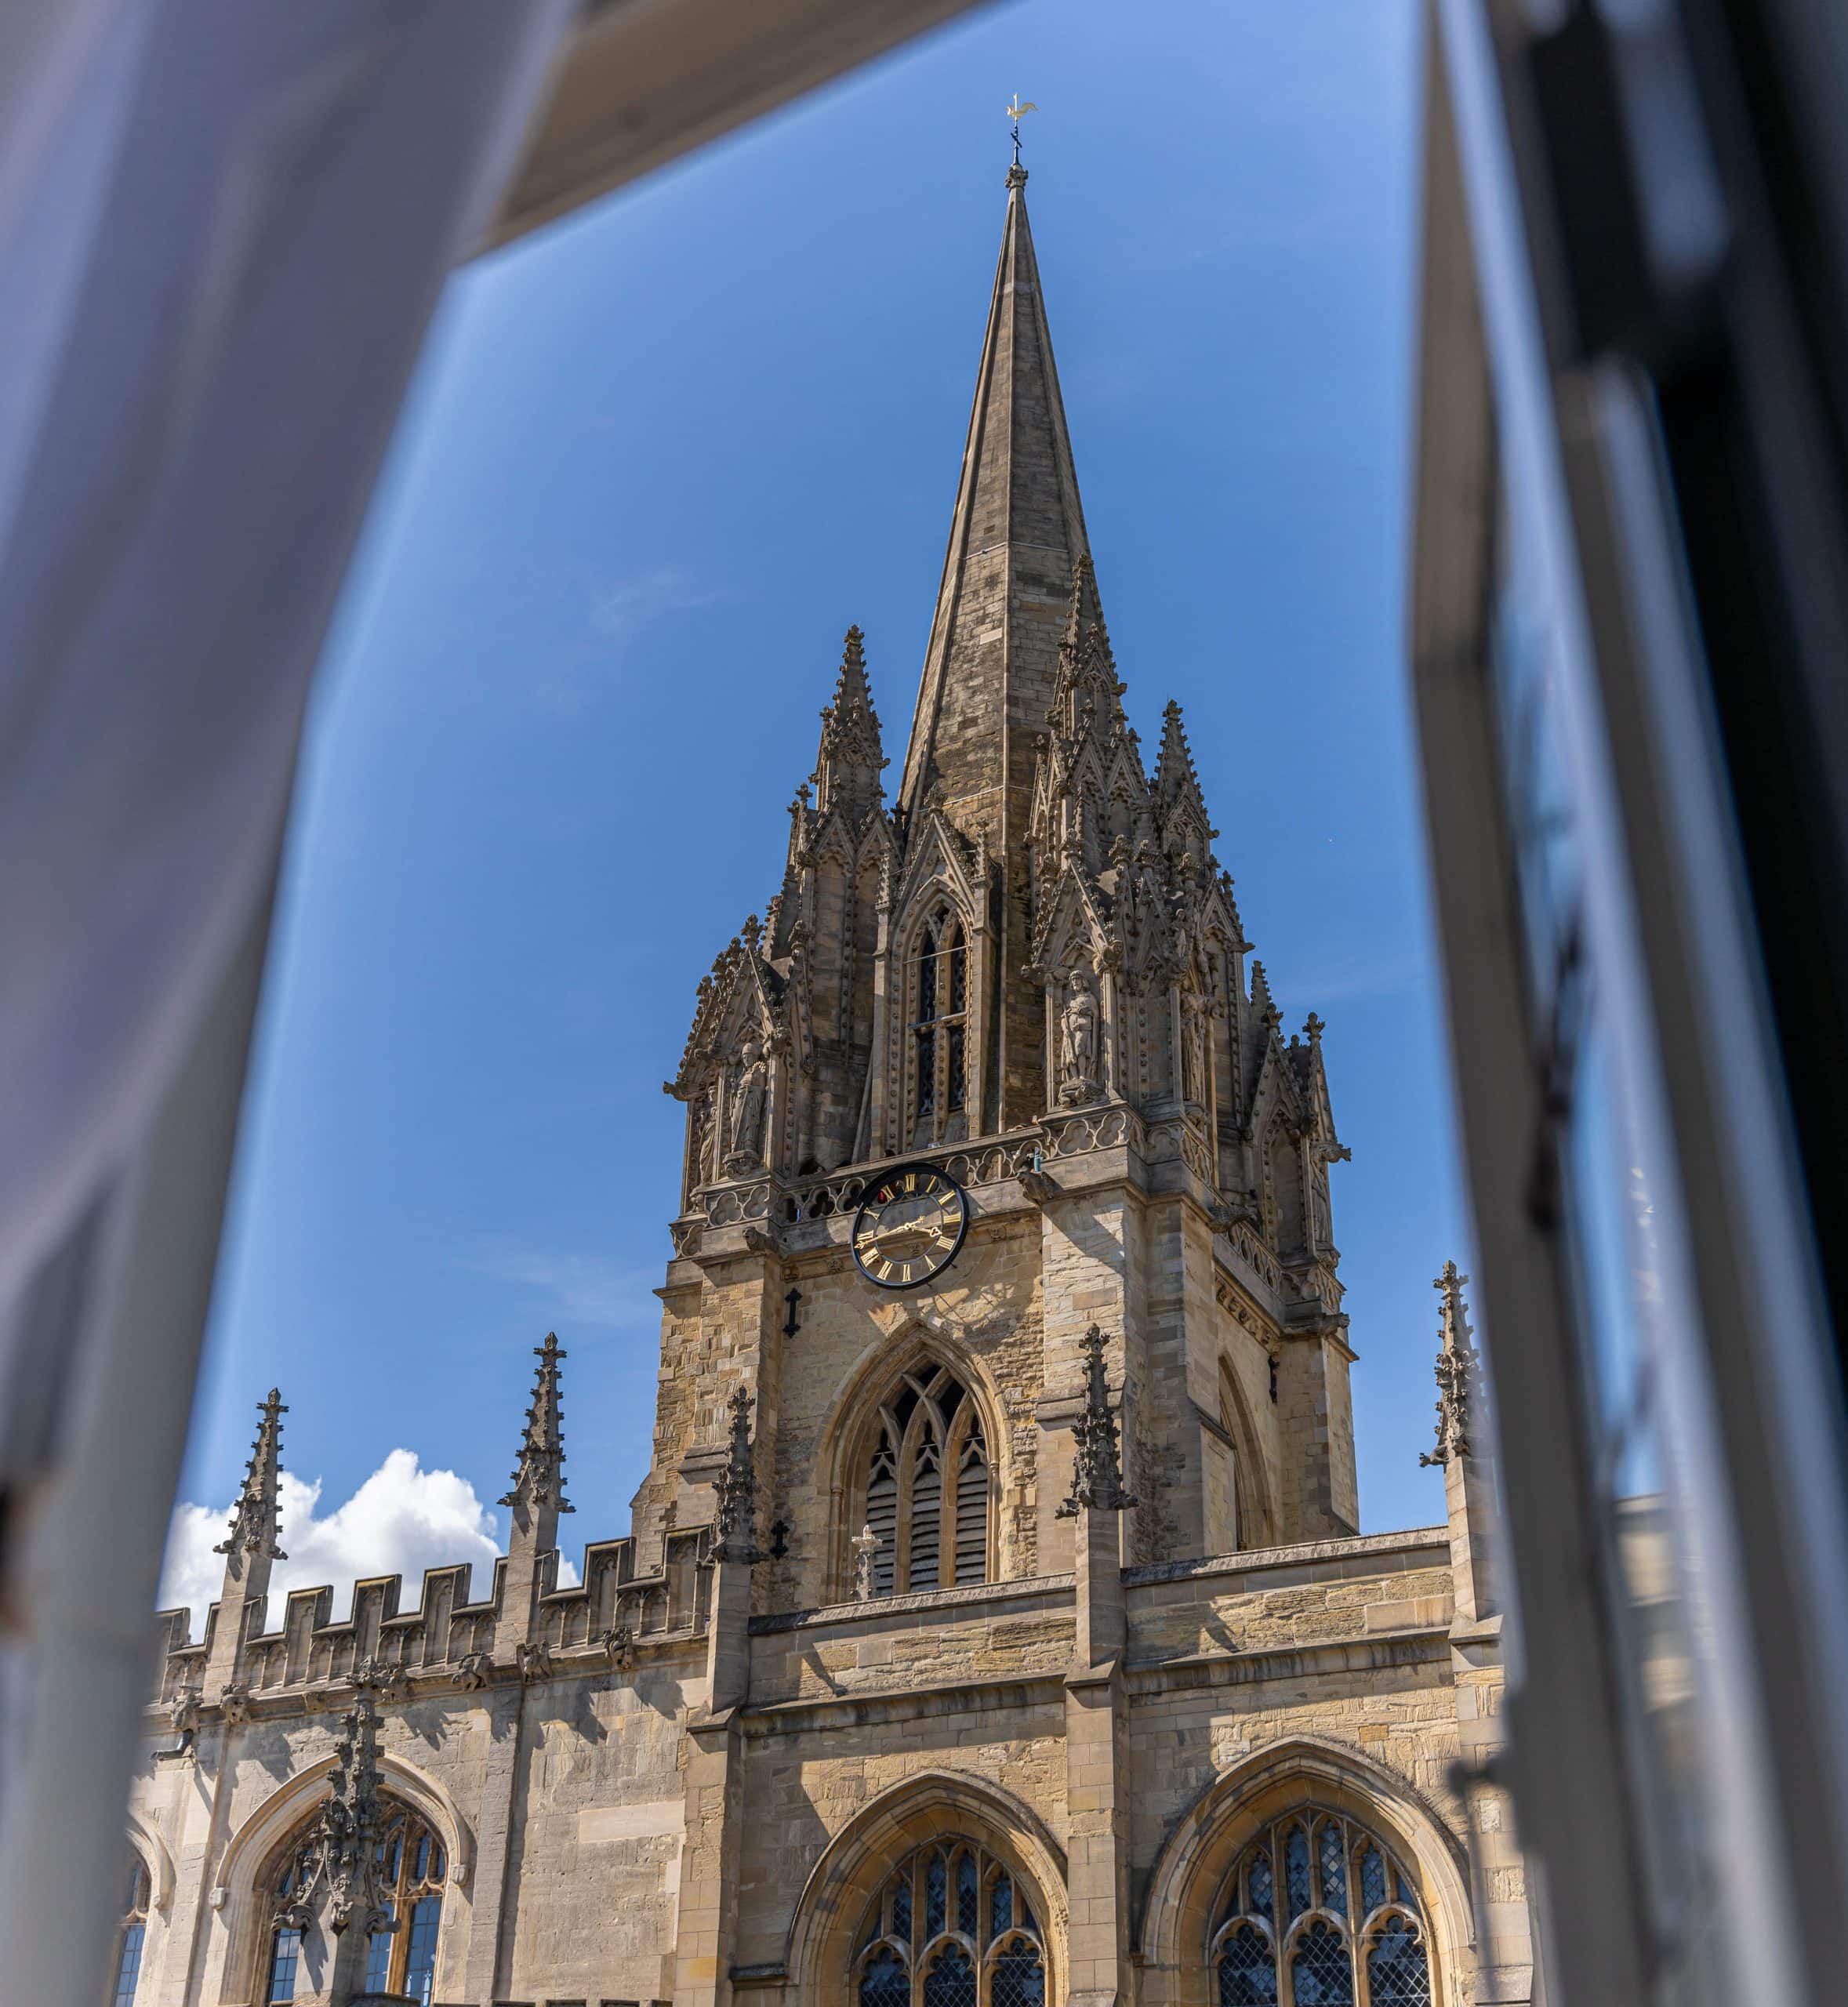 A7R05869-2023-Old-Bank-Hotel-Oxford-High-Res-Window-Spires-View-Room-22-University-Church-of-St-Mary-the-Virgin-Web-Hero-aspect-ratio-2357-2560